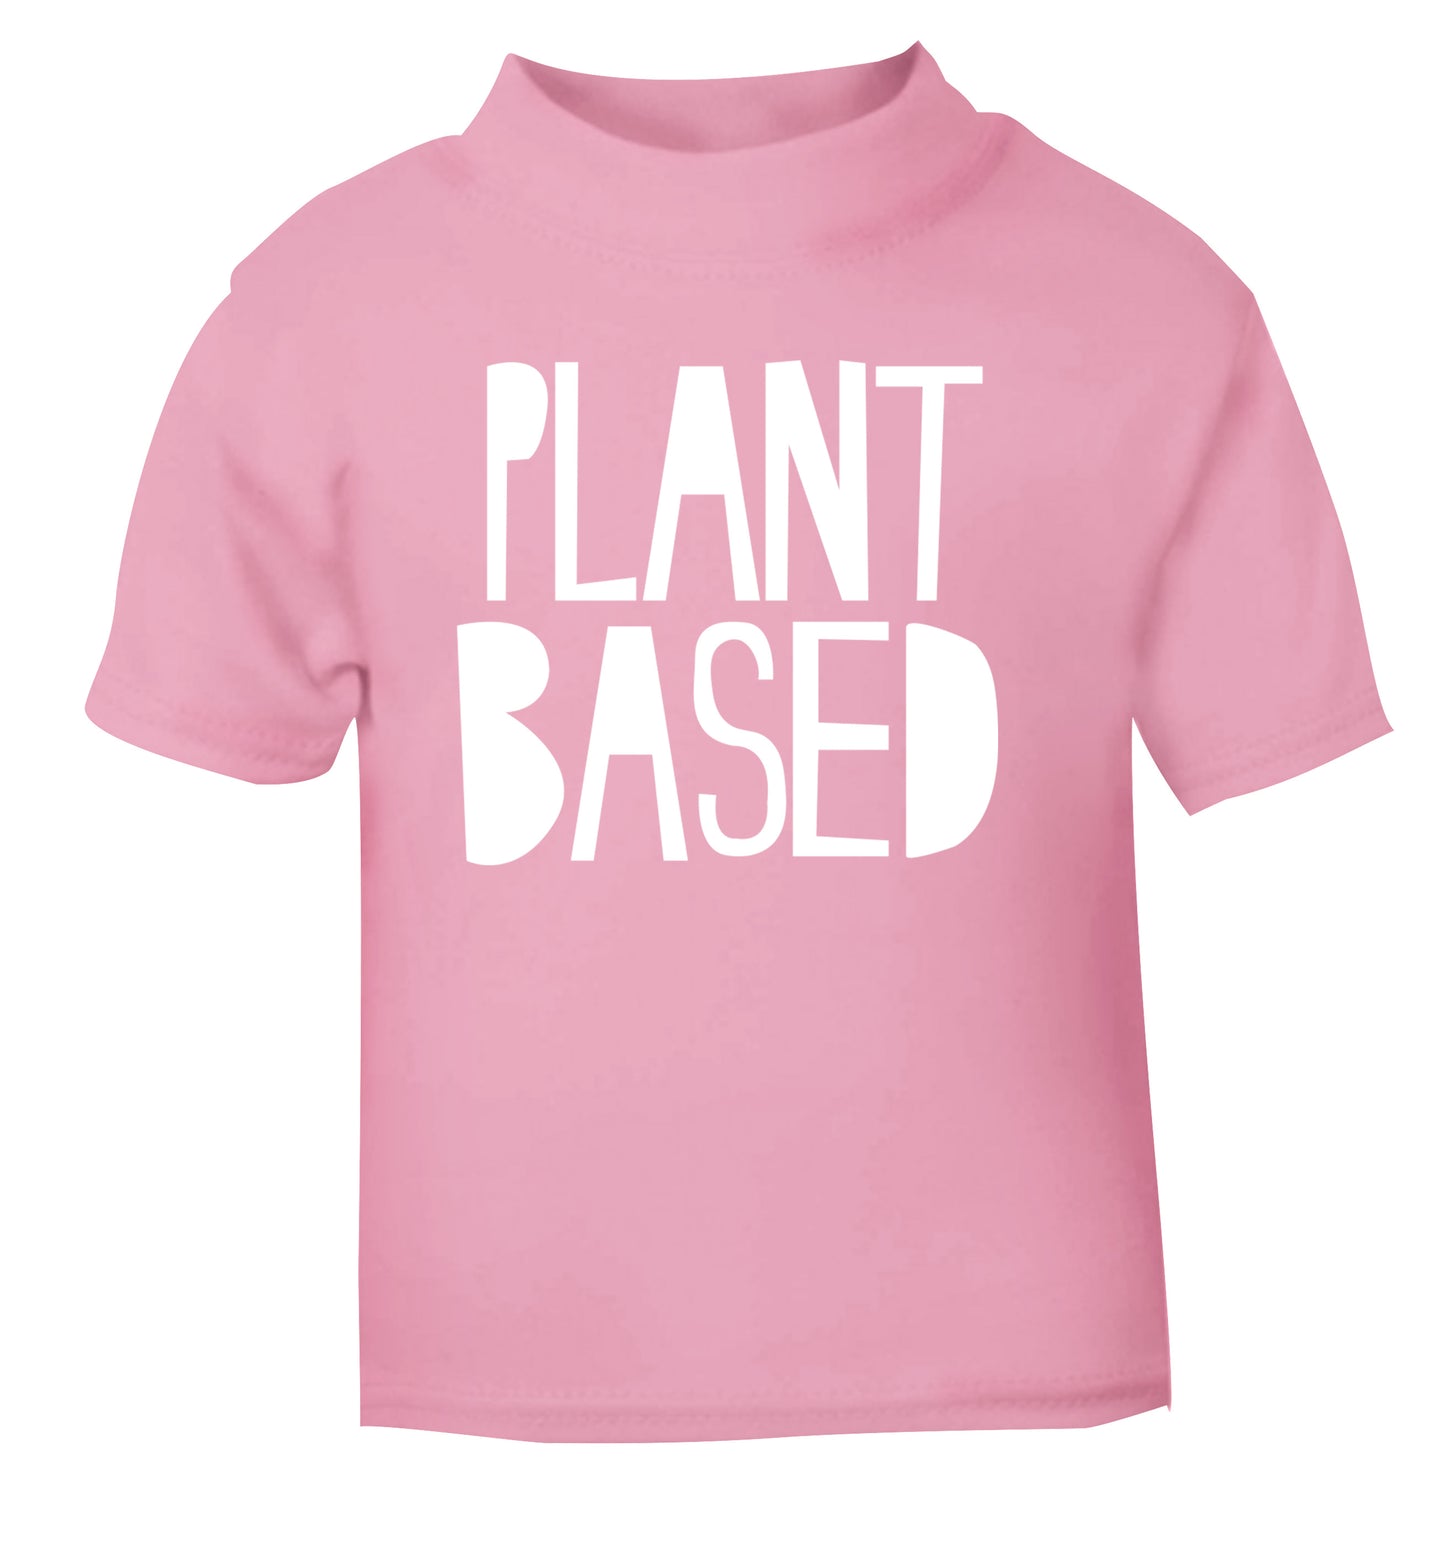 Plant Based light pink Baby Toddler Tshirt 2 Years